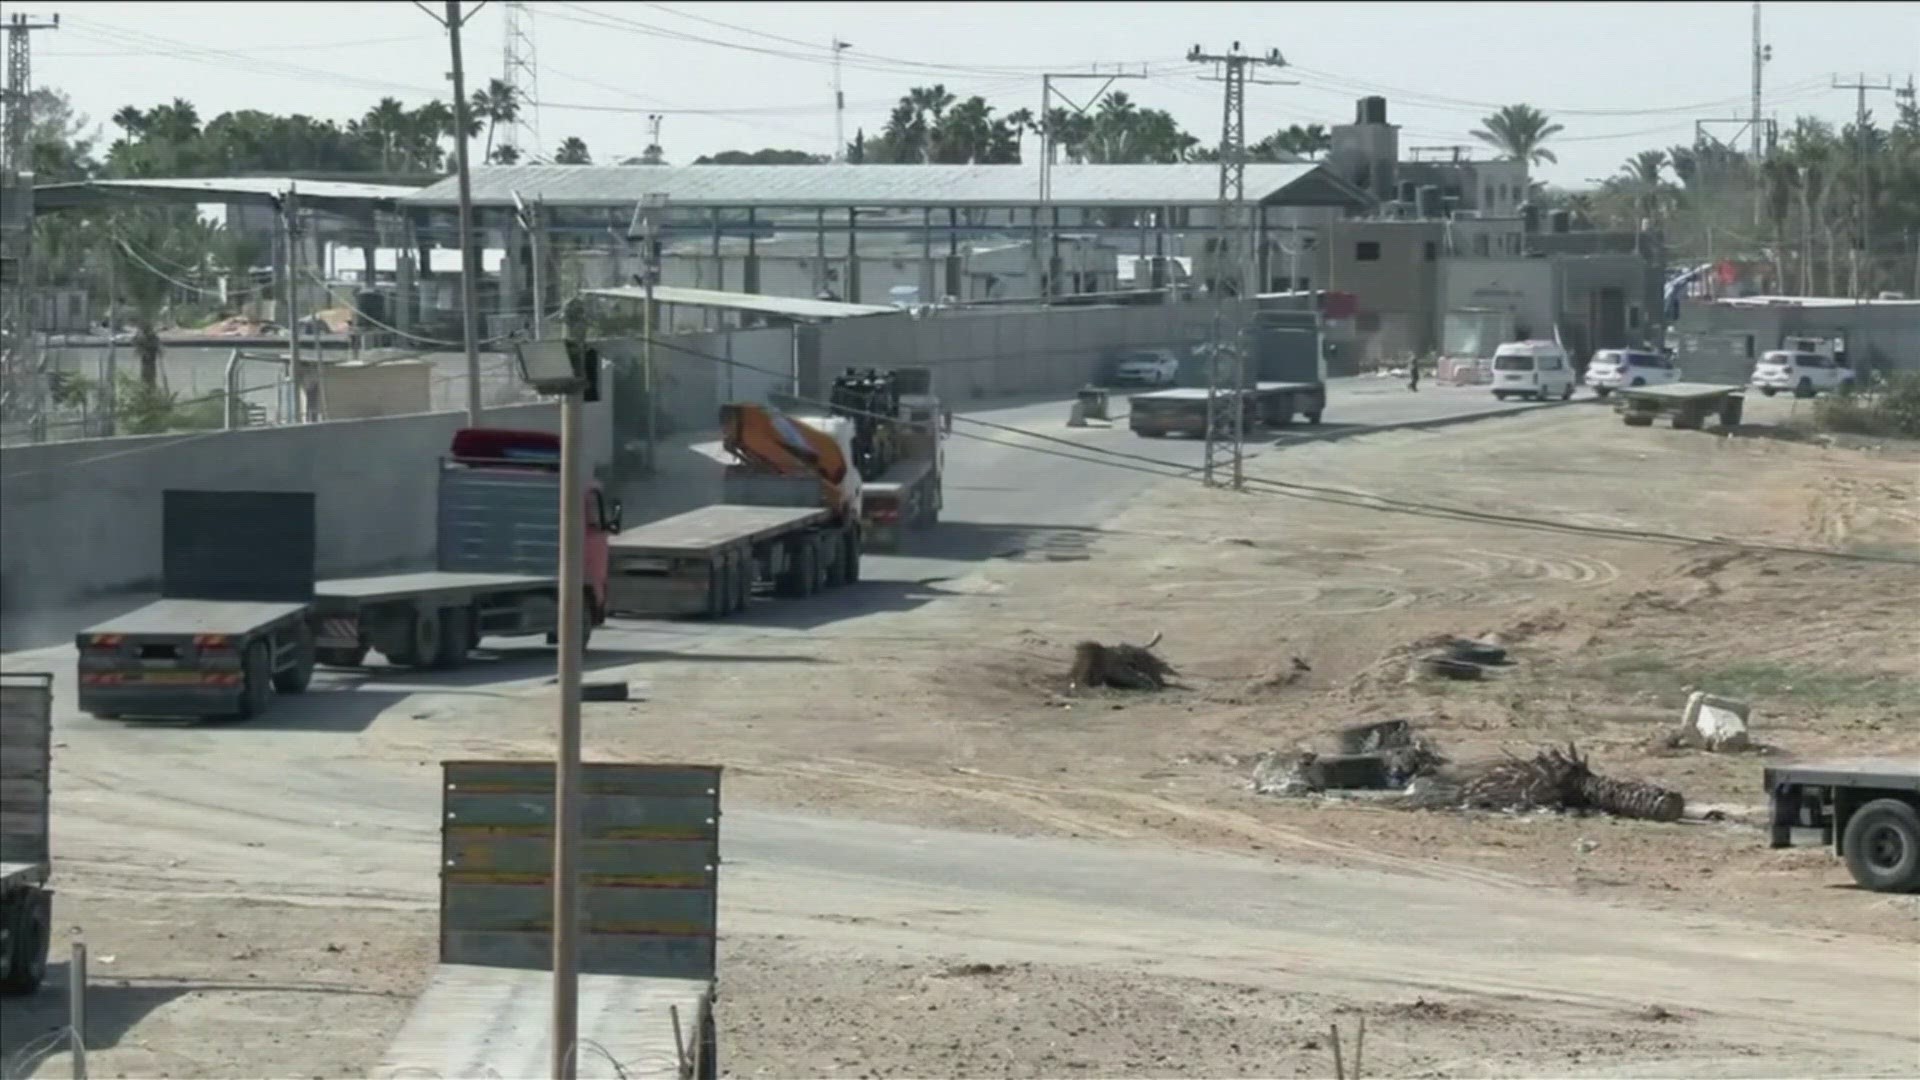 Egypt's border crossing opens to let aid into Gaza